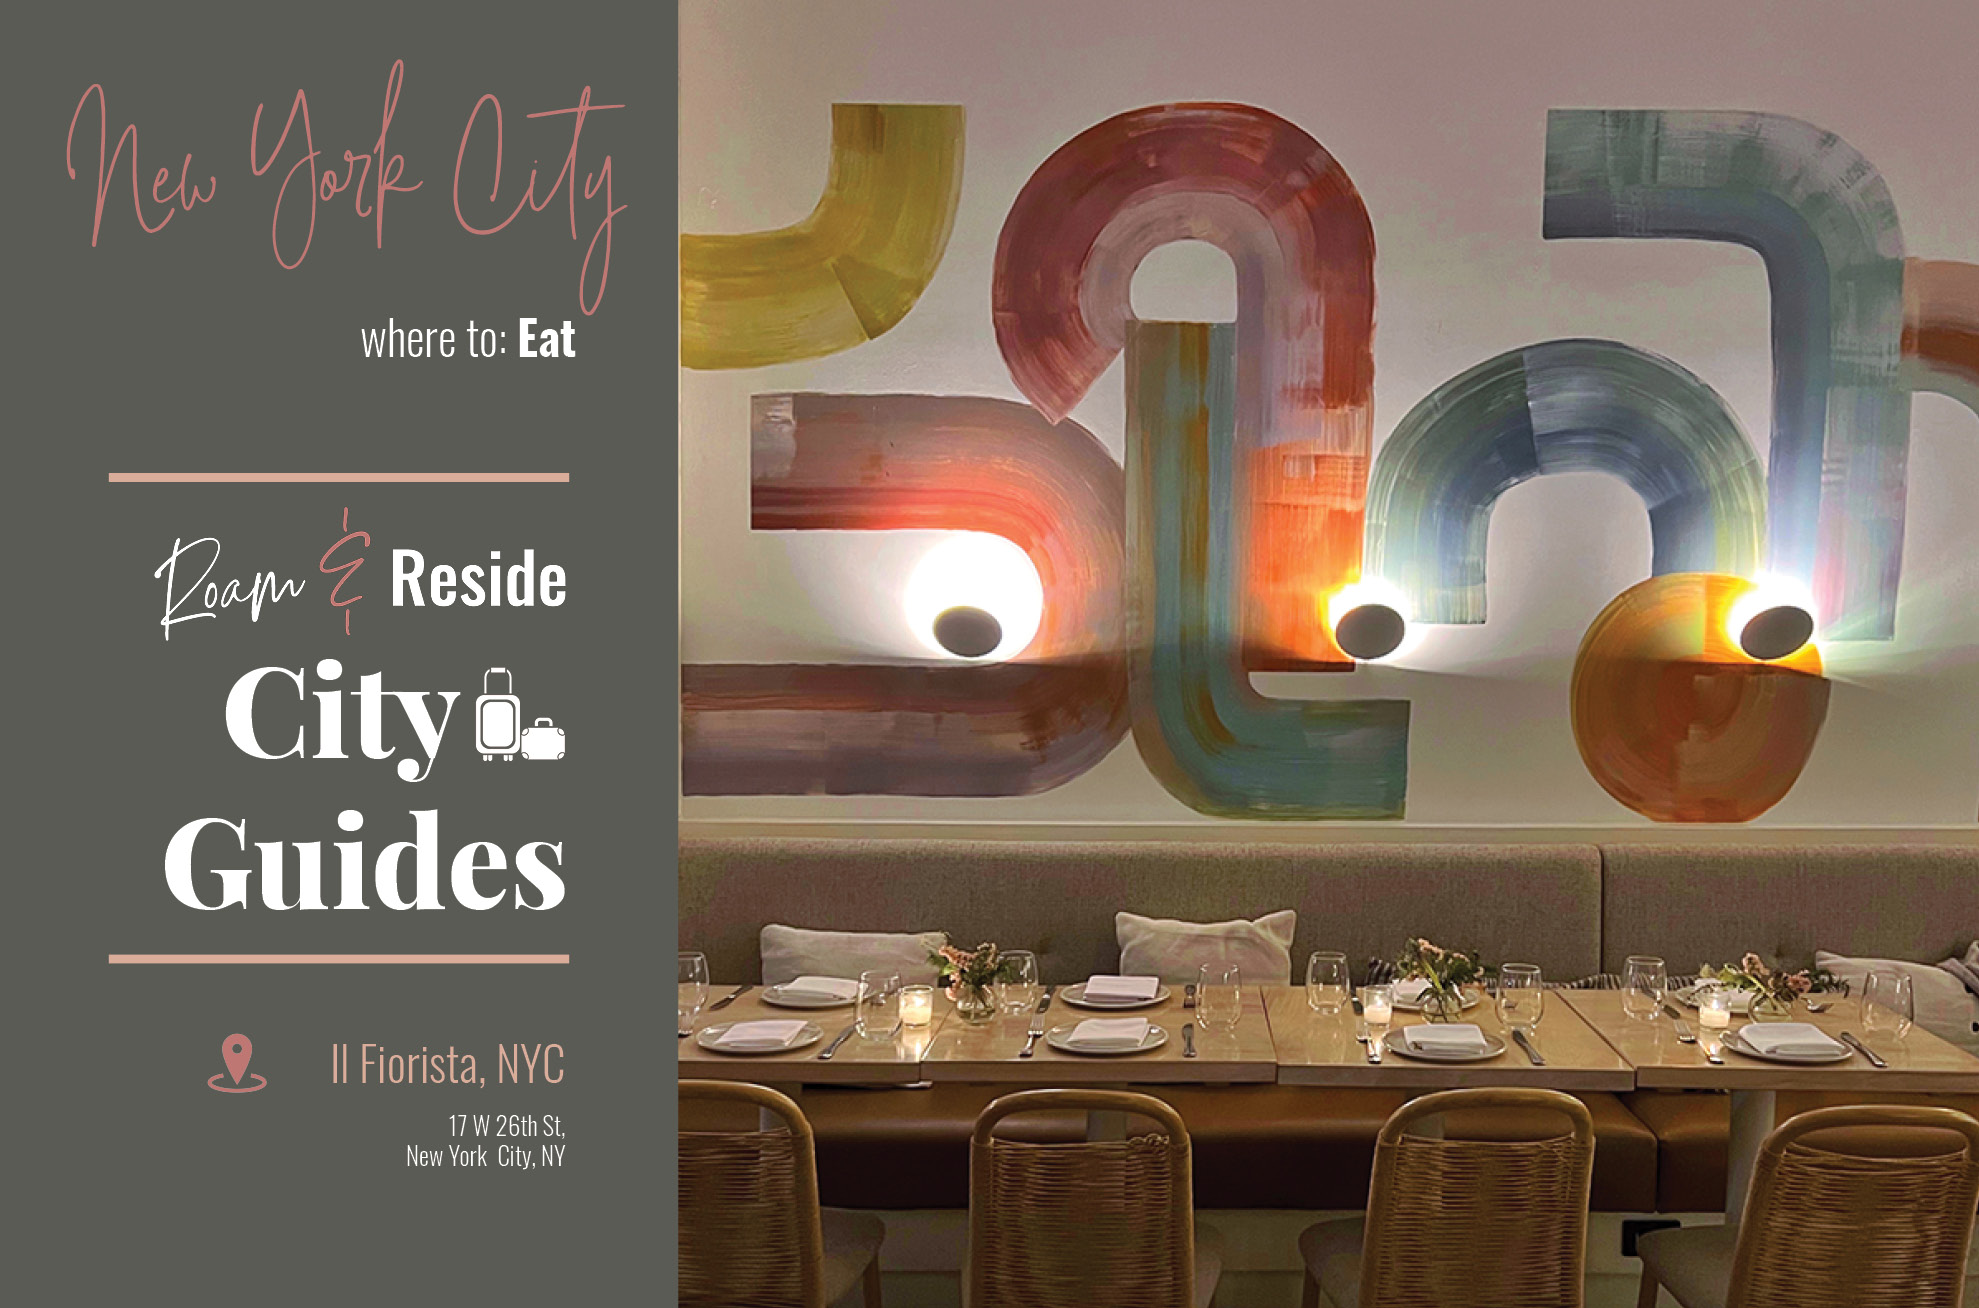 New York City Guide - Where to Eat - Il Fiorista, New York City. Restaurant banquette with floral gastronomy.